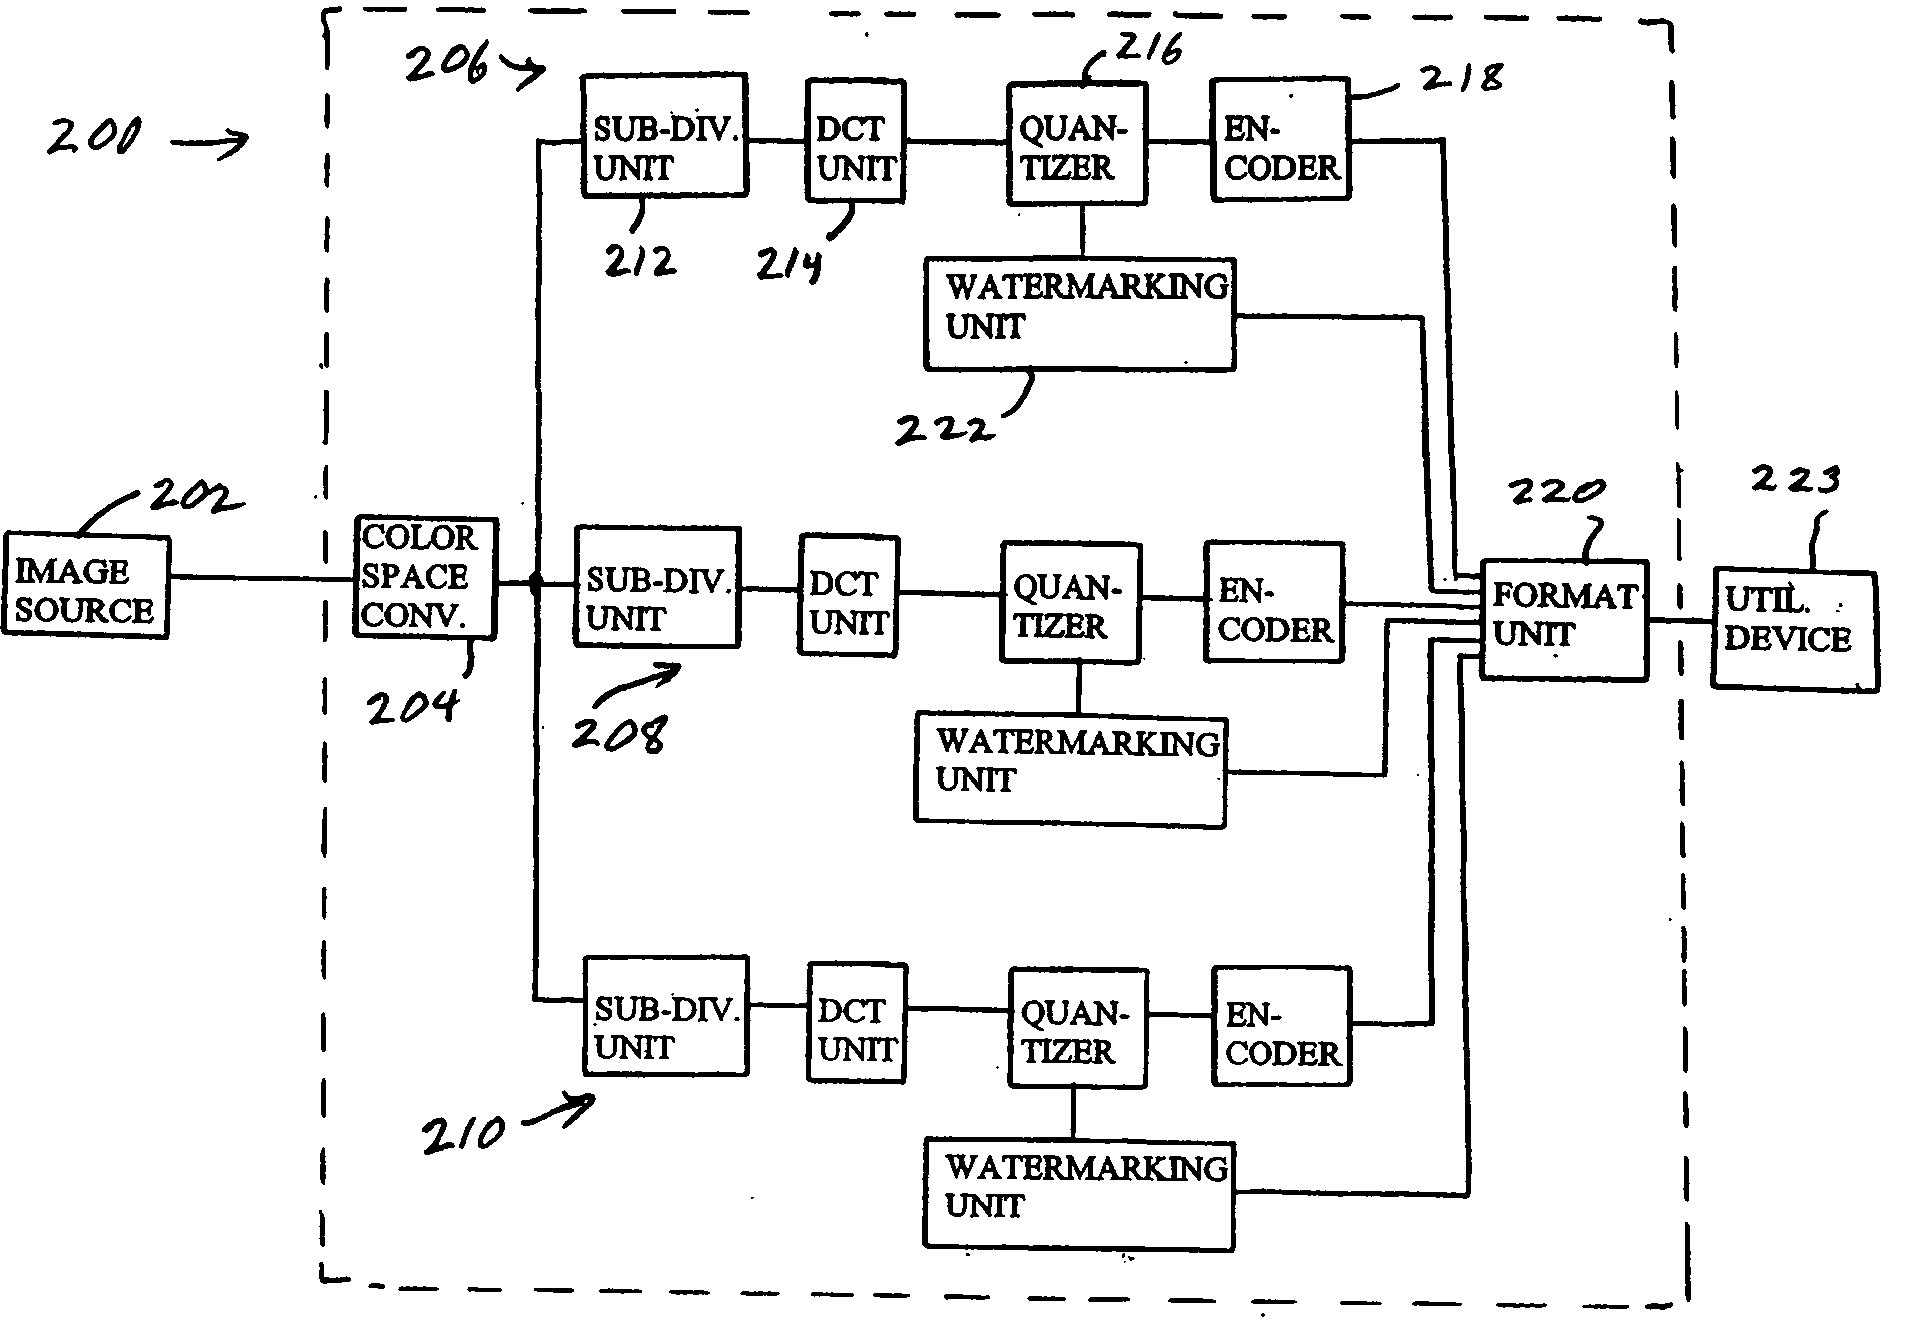 Method and system for watermarking an electronically depicted image